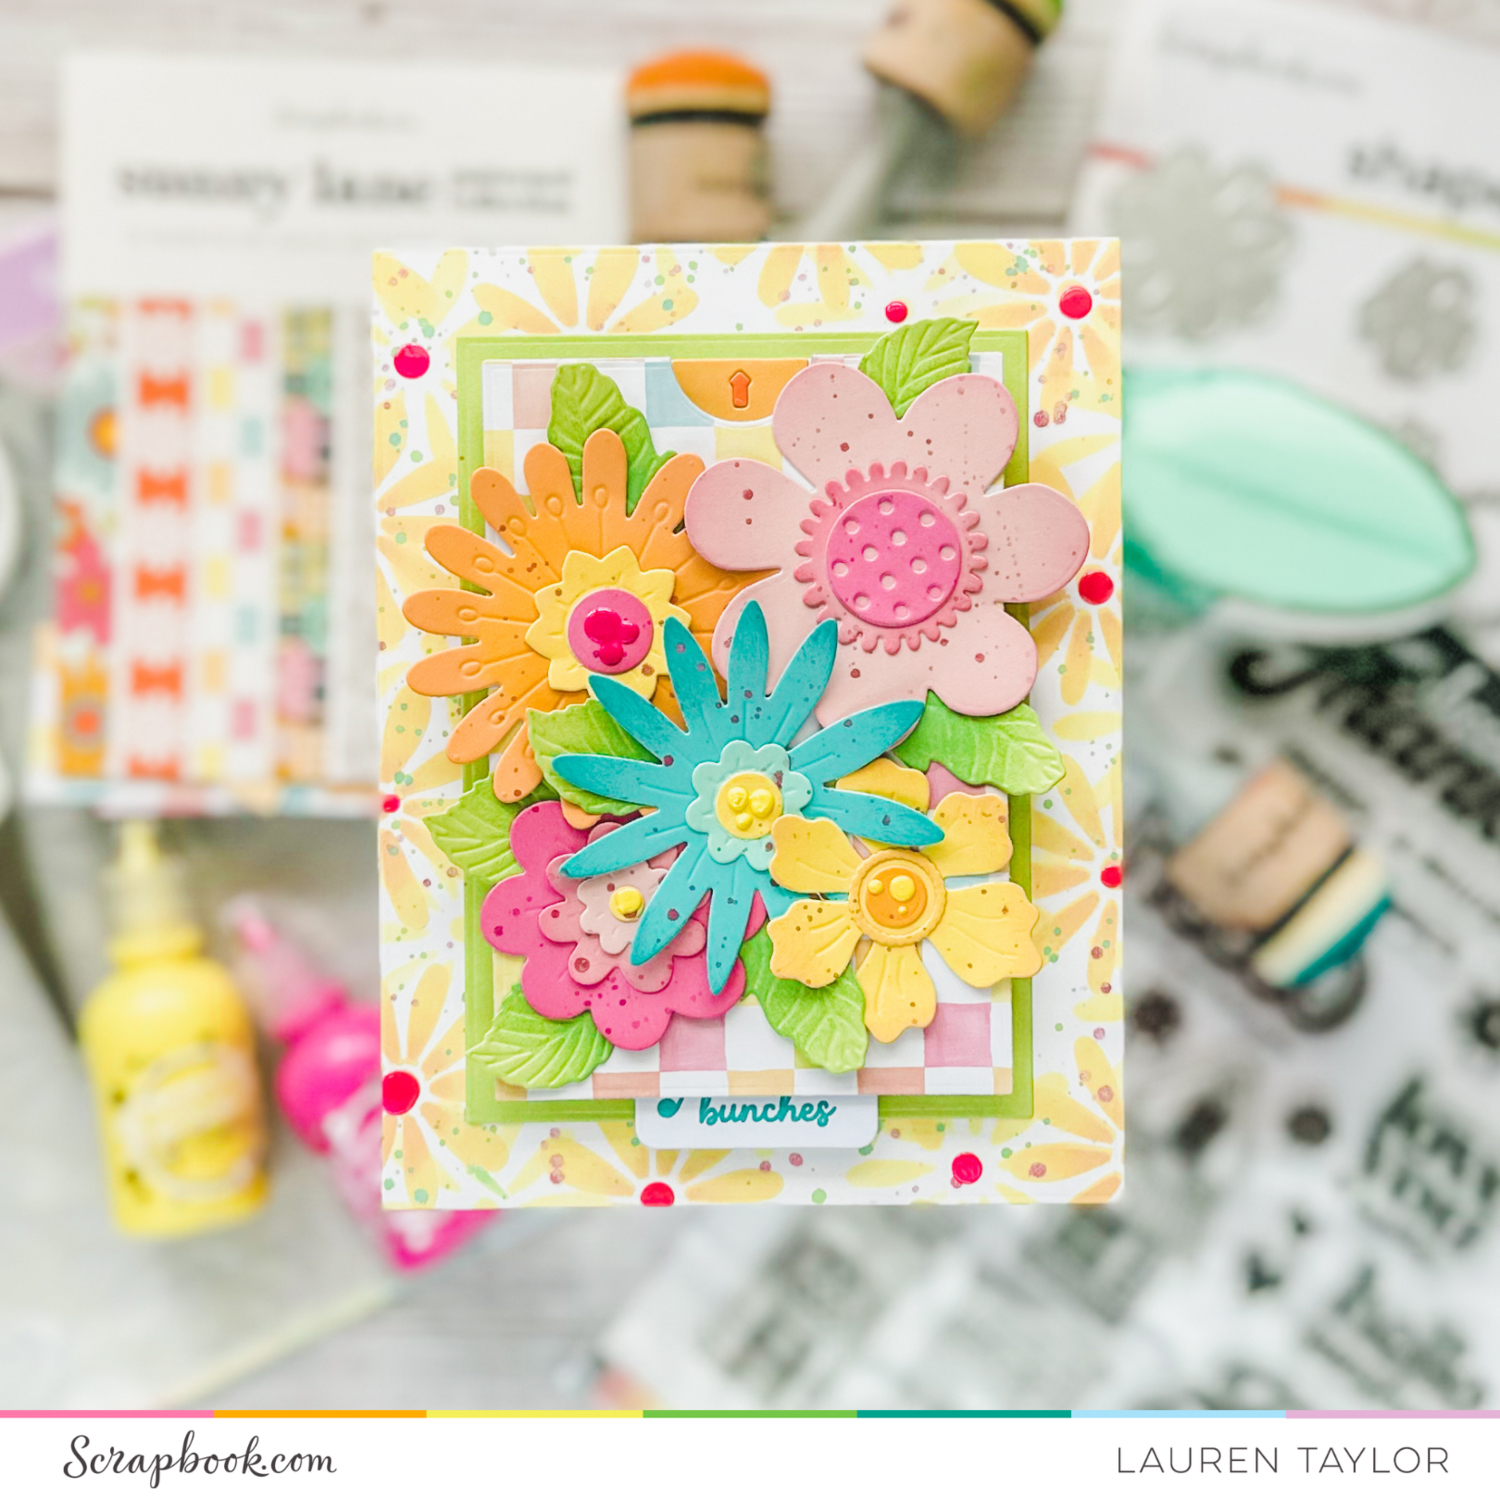 Celebrate World Card Making Day with a Brief History of DIY Cards